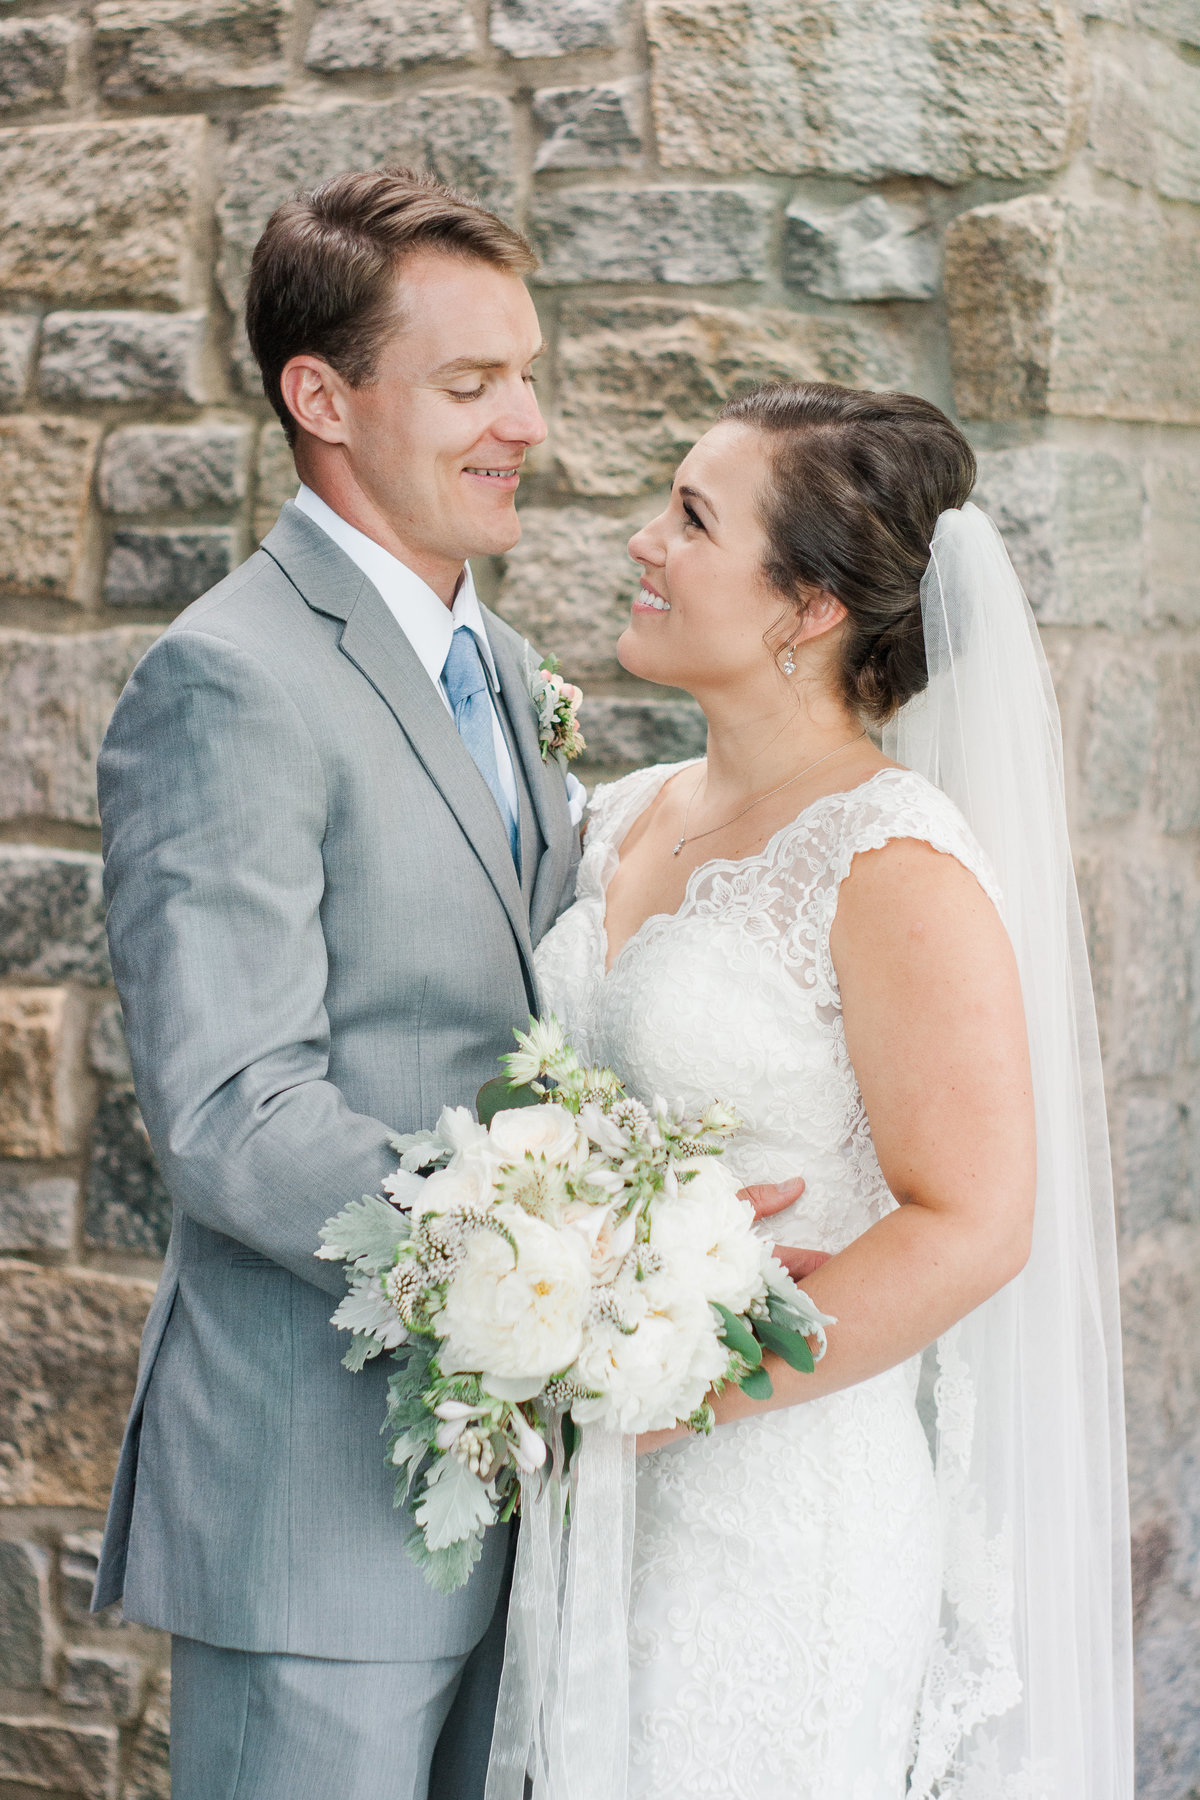 Destination wedding ceremony photographed at Blowing Rock Country Club by Boone Photographer Wayfaring Wanderer. BRCC is a gorgeous venue in Blowing Rock, NC.